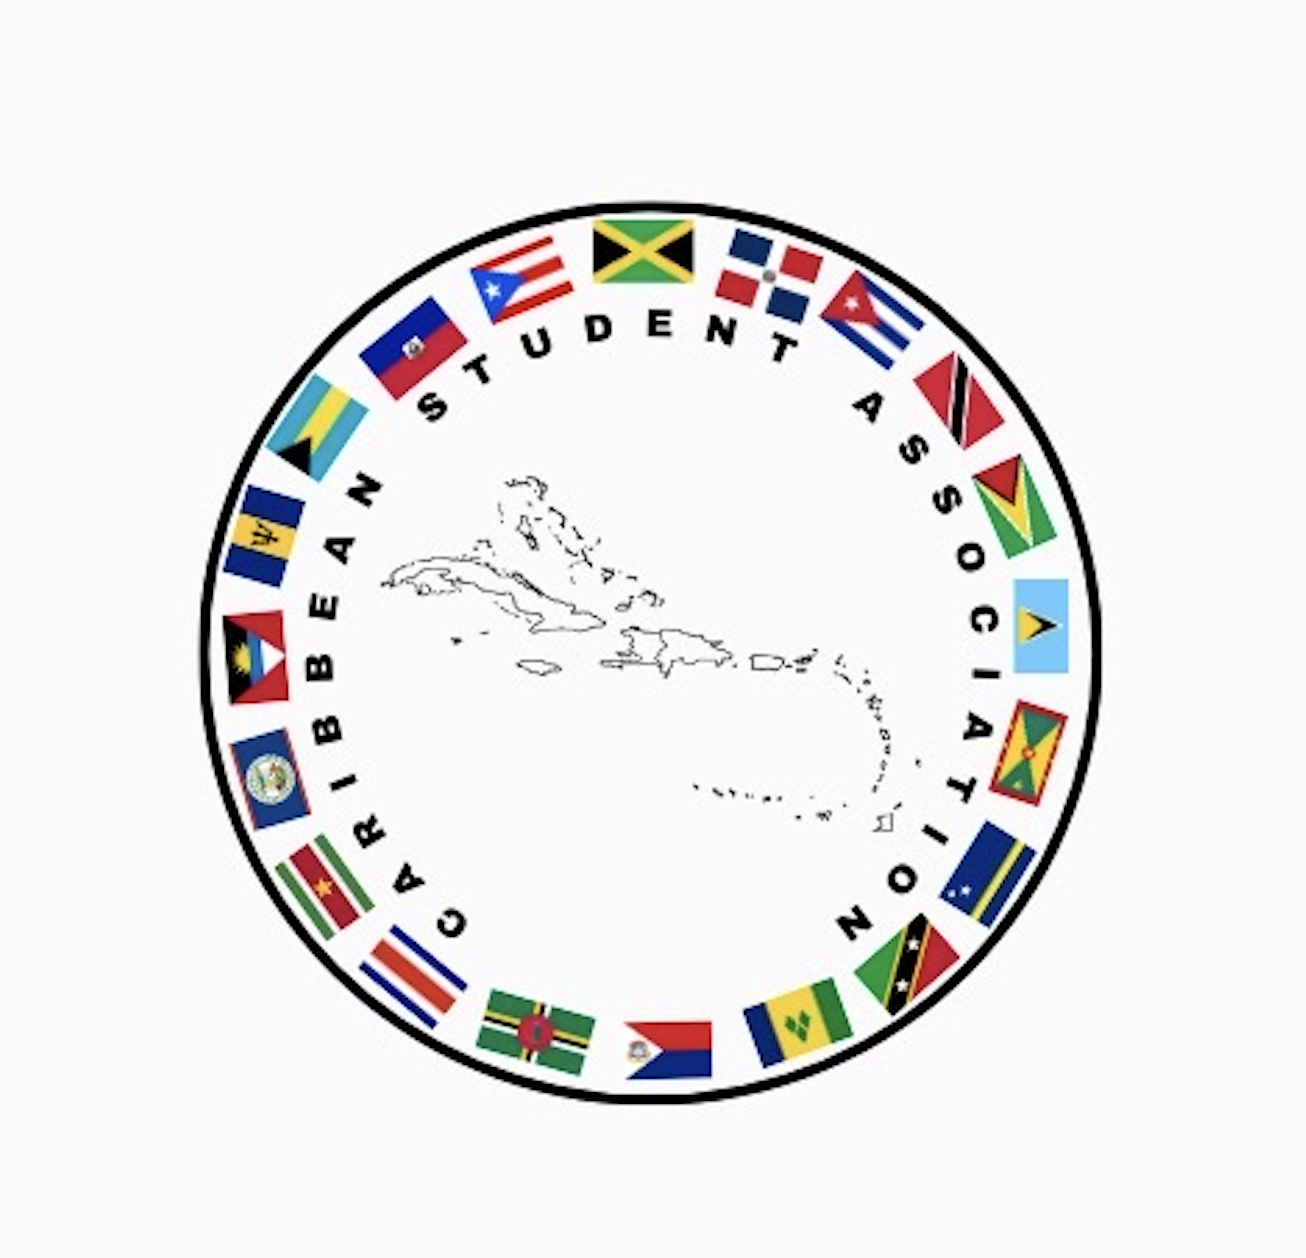 Caribbean+Student+Association+will+connect+existing+community